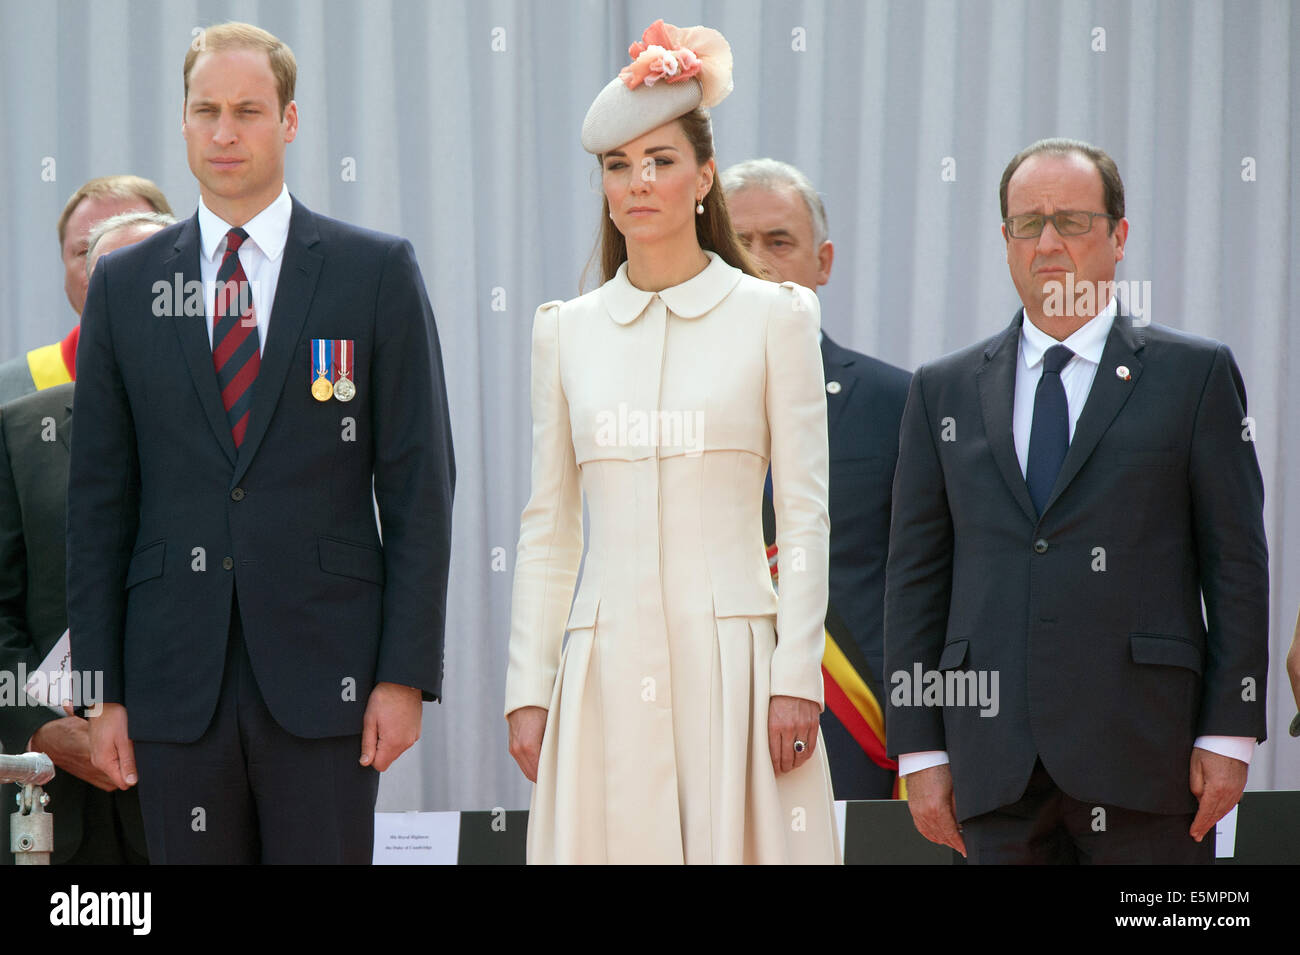 Liege, Belgium. 04th Aug, 2014. British Prince William (L-R), his wife, Duchess Kate, and French President Francois Hollande take part in the international memorial ceremony for the 100th anniversary of the beginning of the First World War in Liege, Belgium, 04 August 2014. The year 2014 sees the 100th anniversary of the beginning of WWI, or the Great War, which according to official statistics cost more than 37 million military and civilian casualties between 1914 and 1918. Photo: Maurizio Gambarini/dpa/Alamy Live News Stock Photo